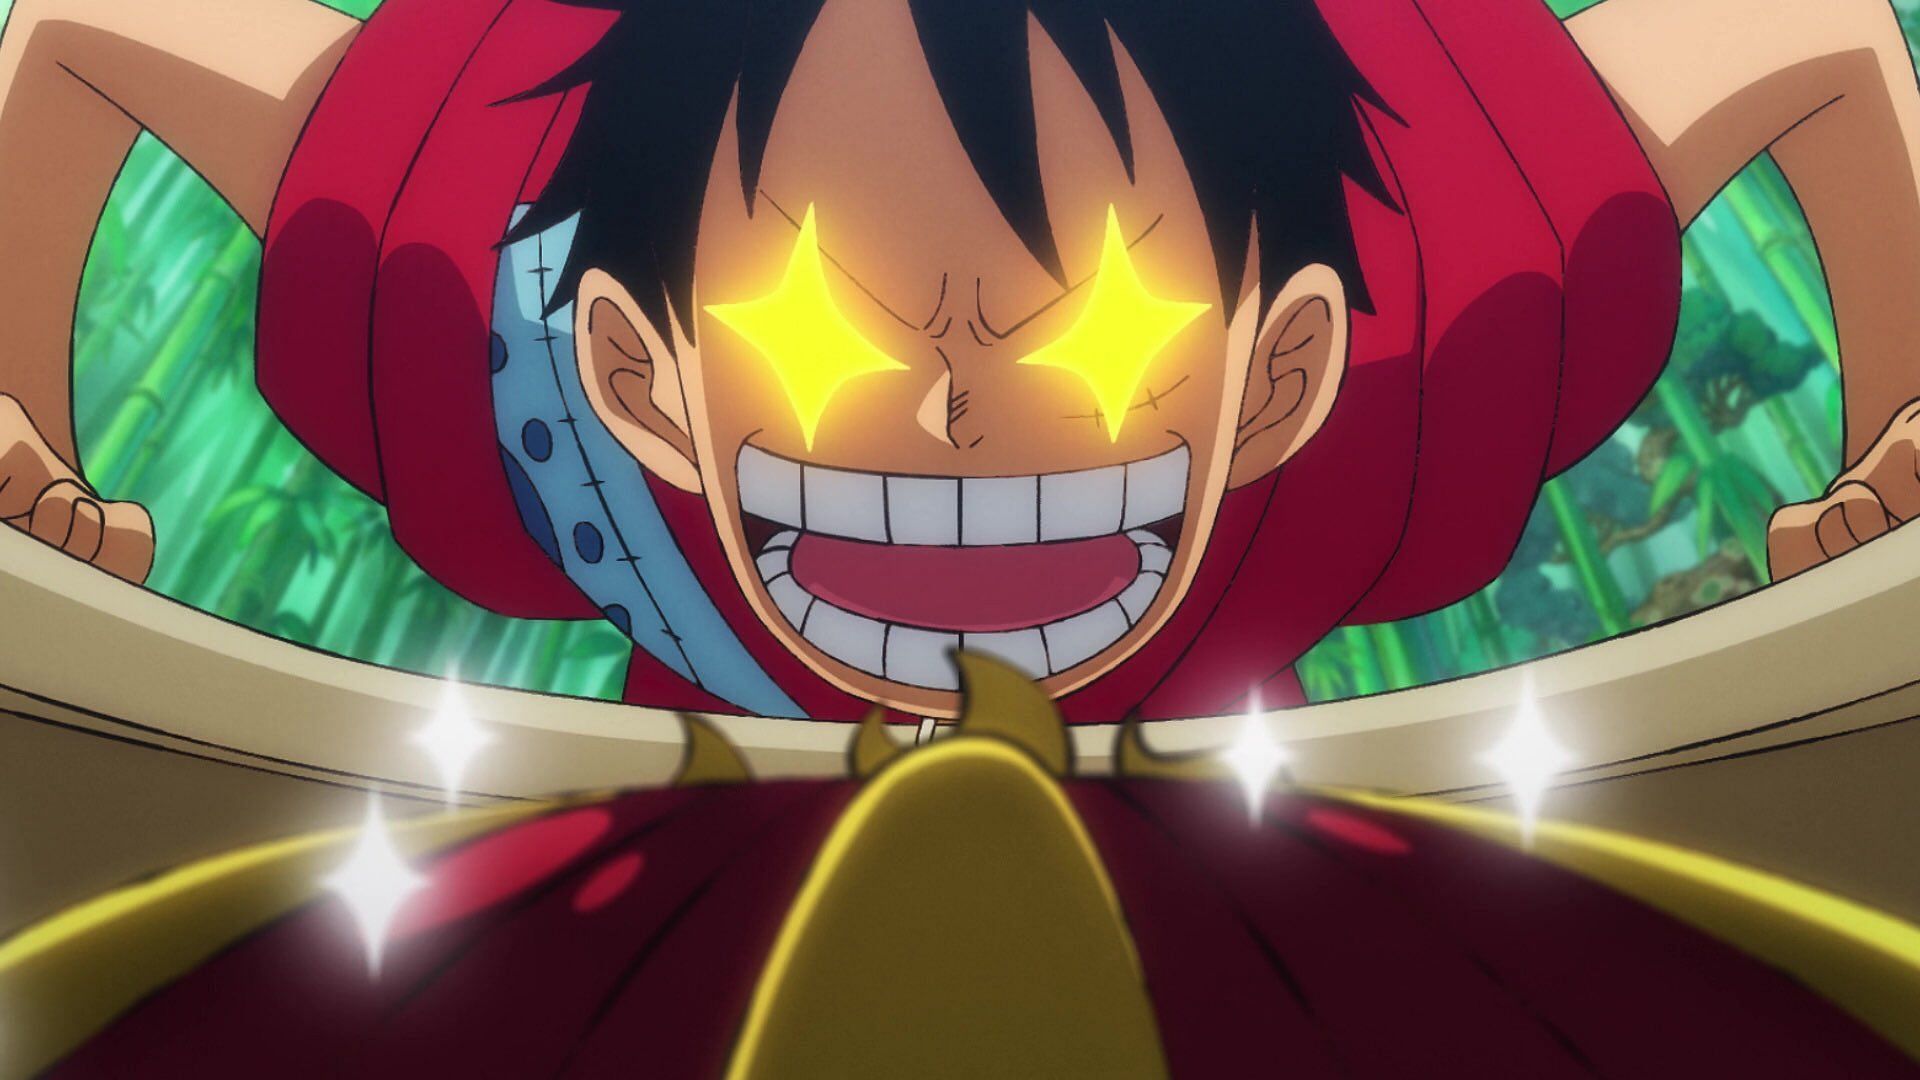 Fans can hardly contain their excitement over the latest One Piece live-action news (Image via Toei Animation)